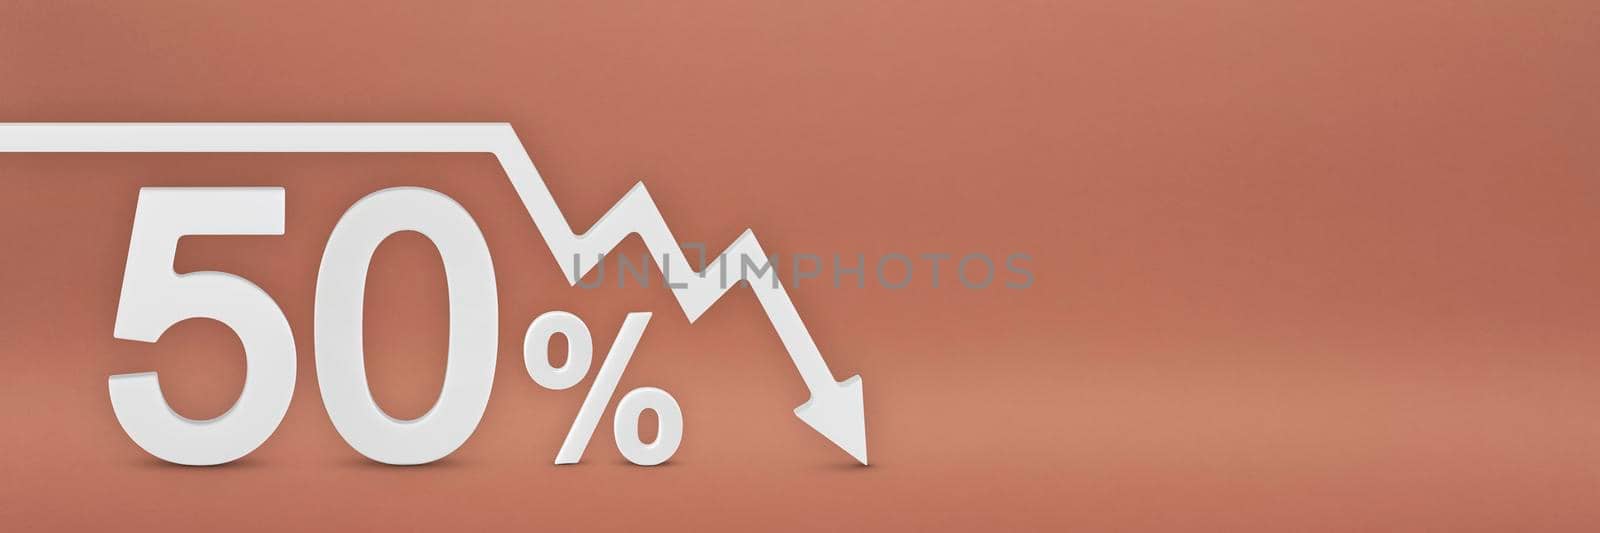 fifty percent, the arrow on the graph is pointing down. Stock market crash, bear market, inflation.Economic collapse, collapse of stocks.3d banner,50 percent discount sign on a red background